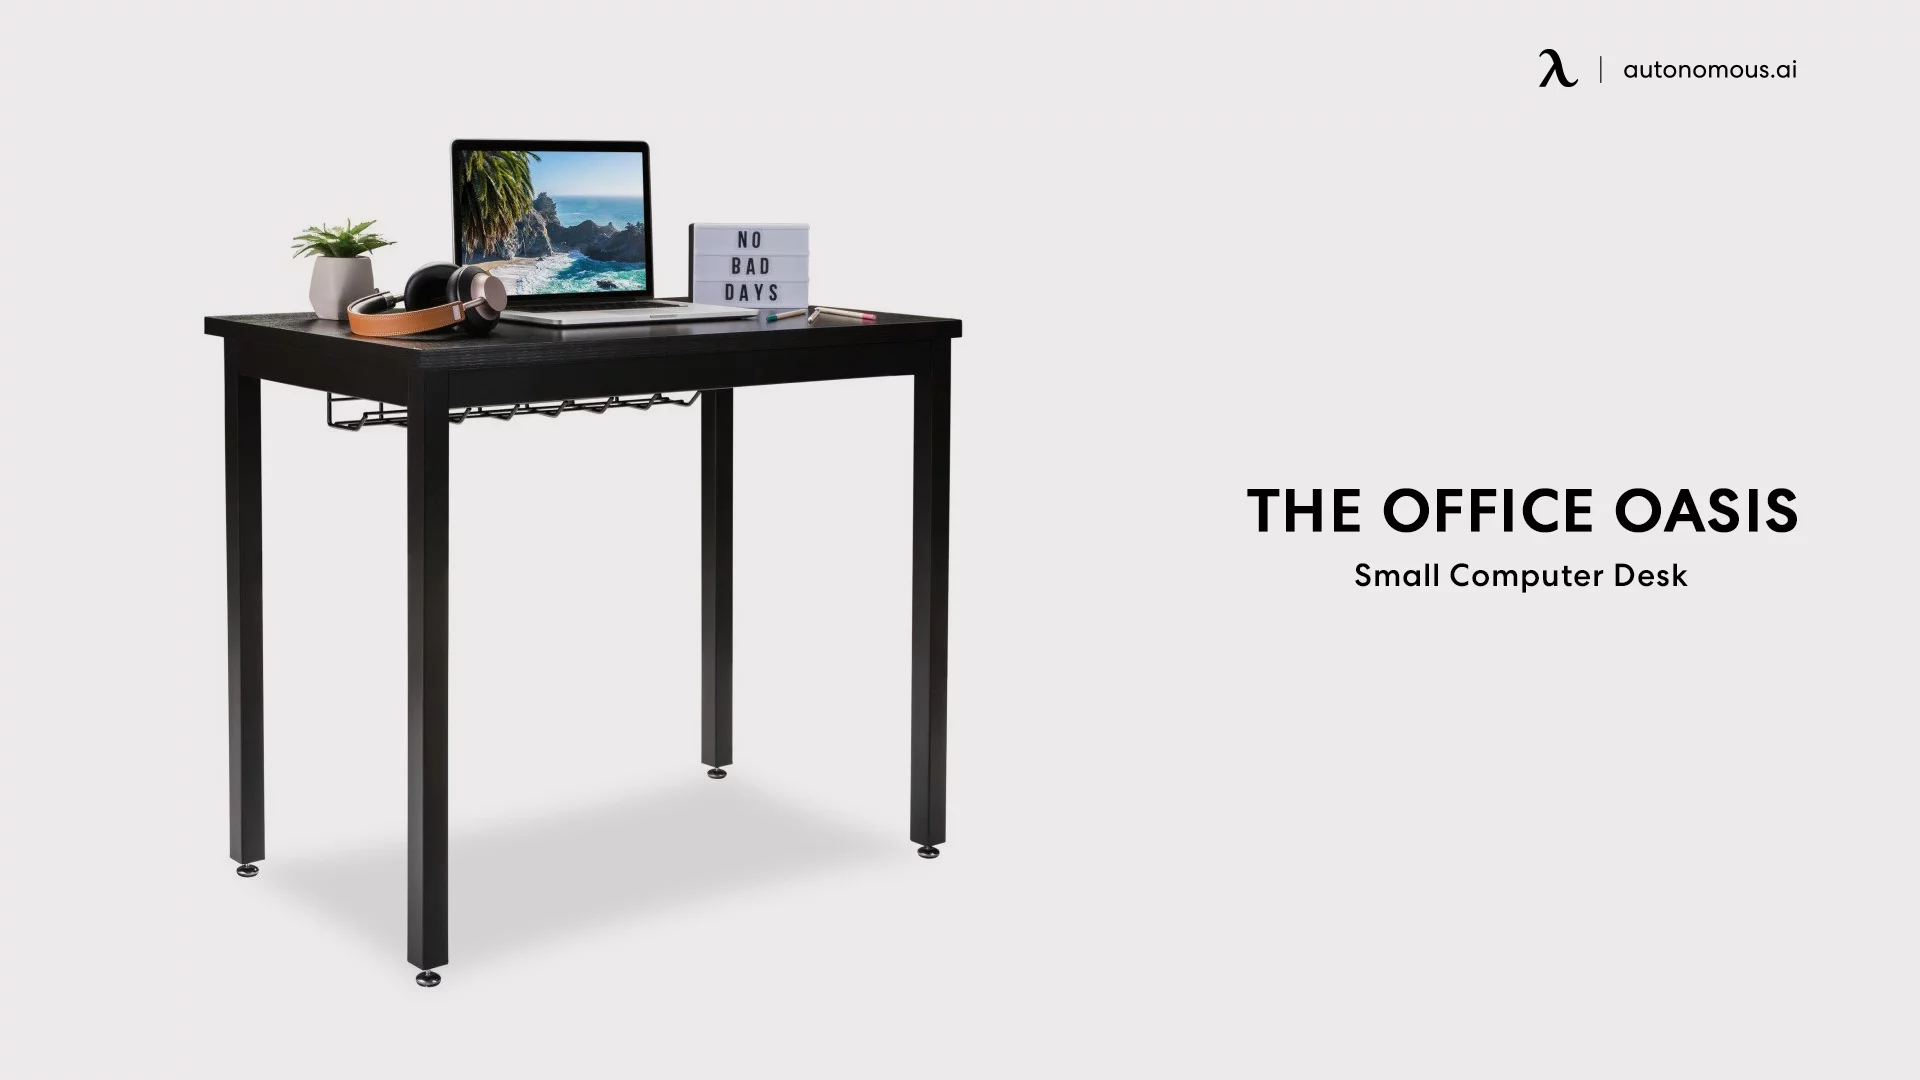 The Office Oasis Small Computer Desk